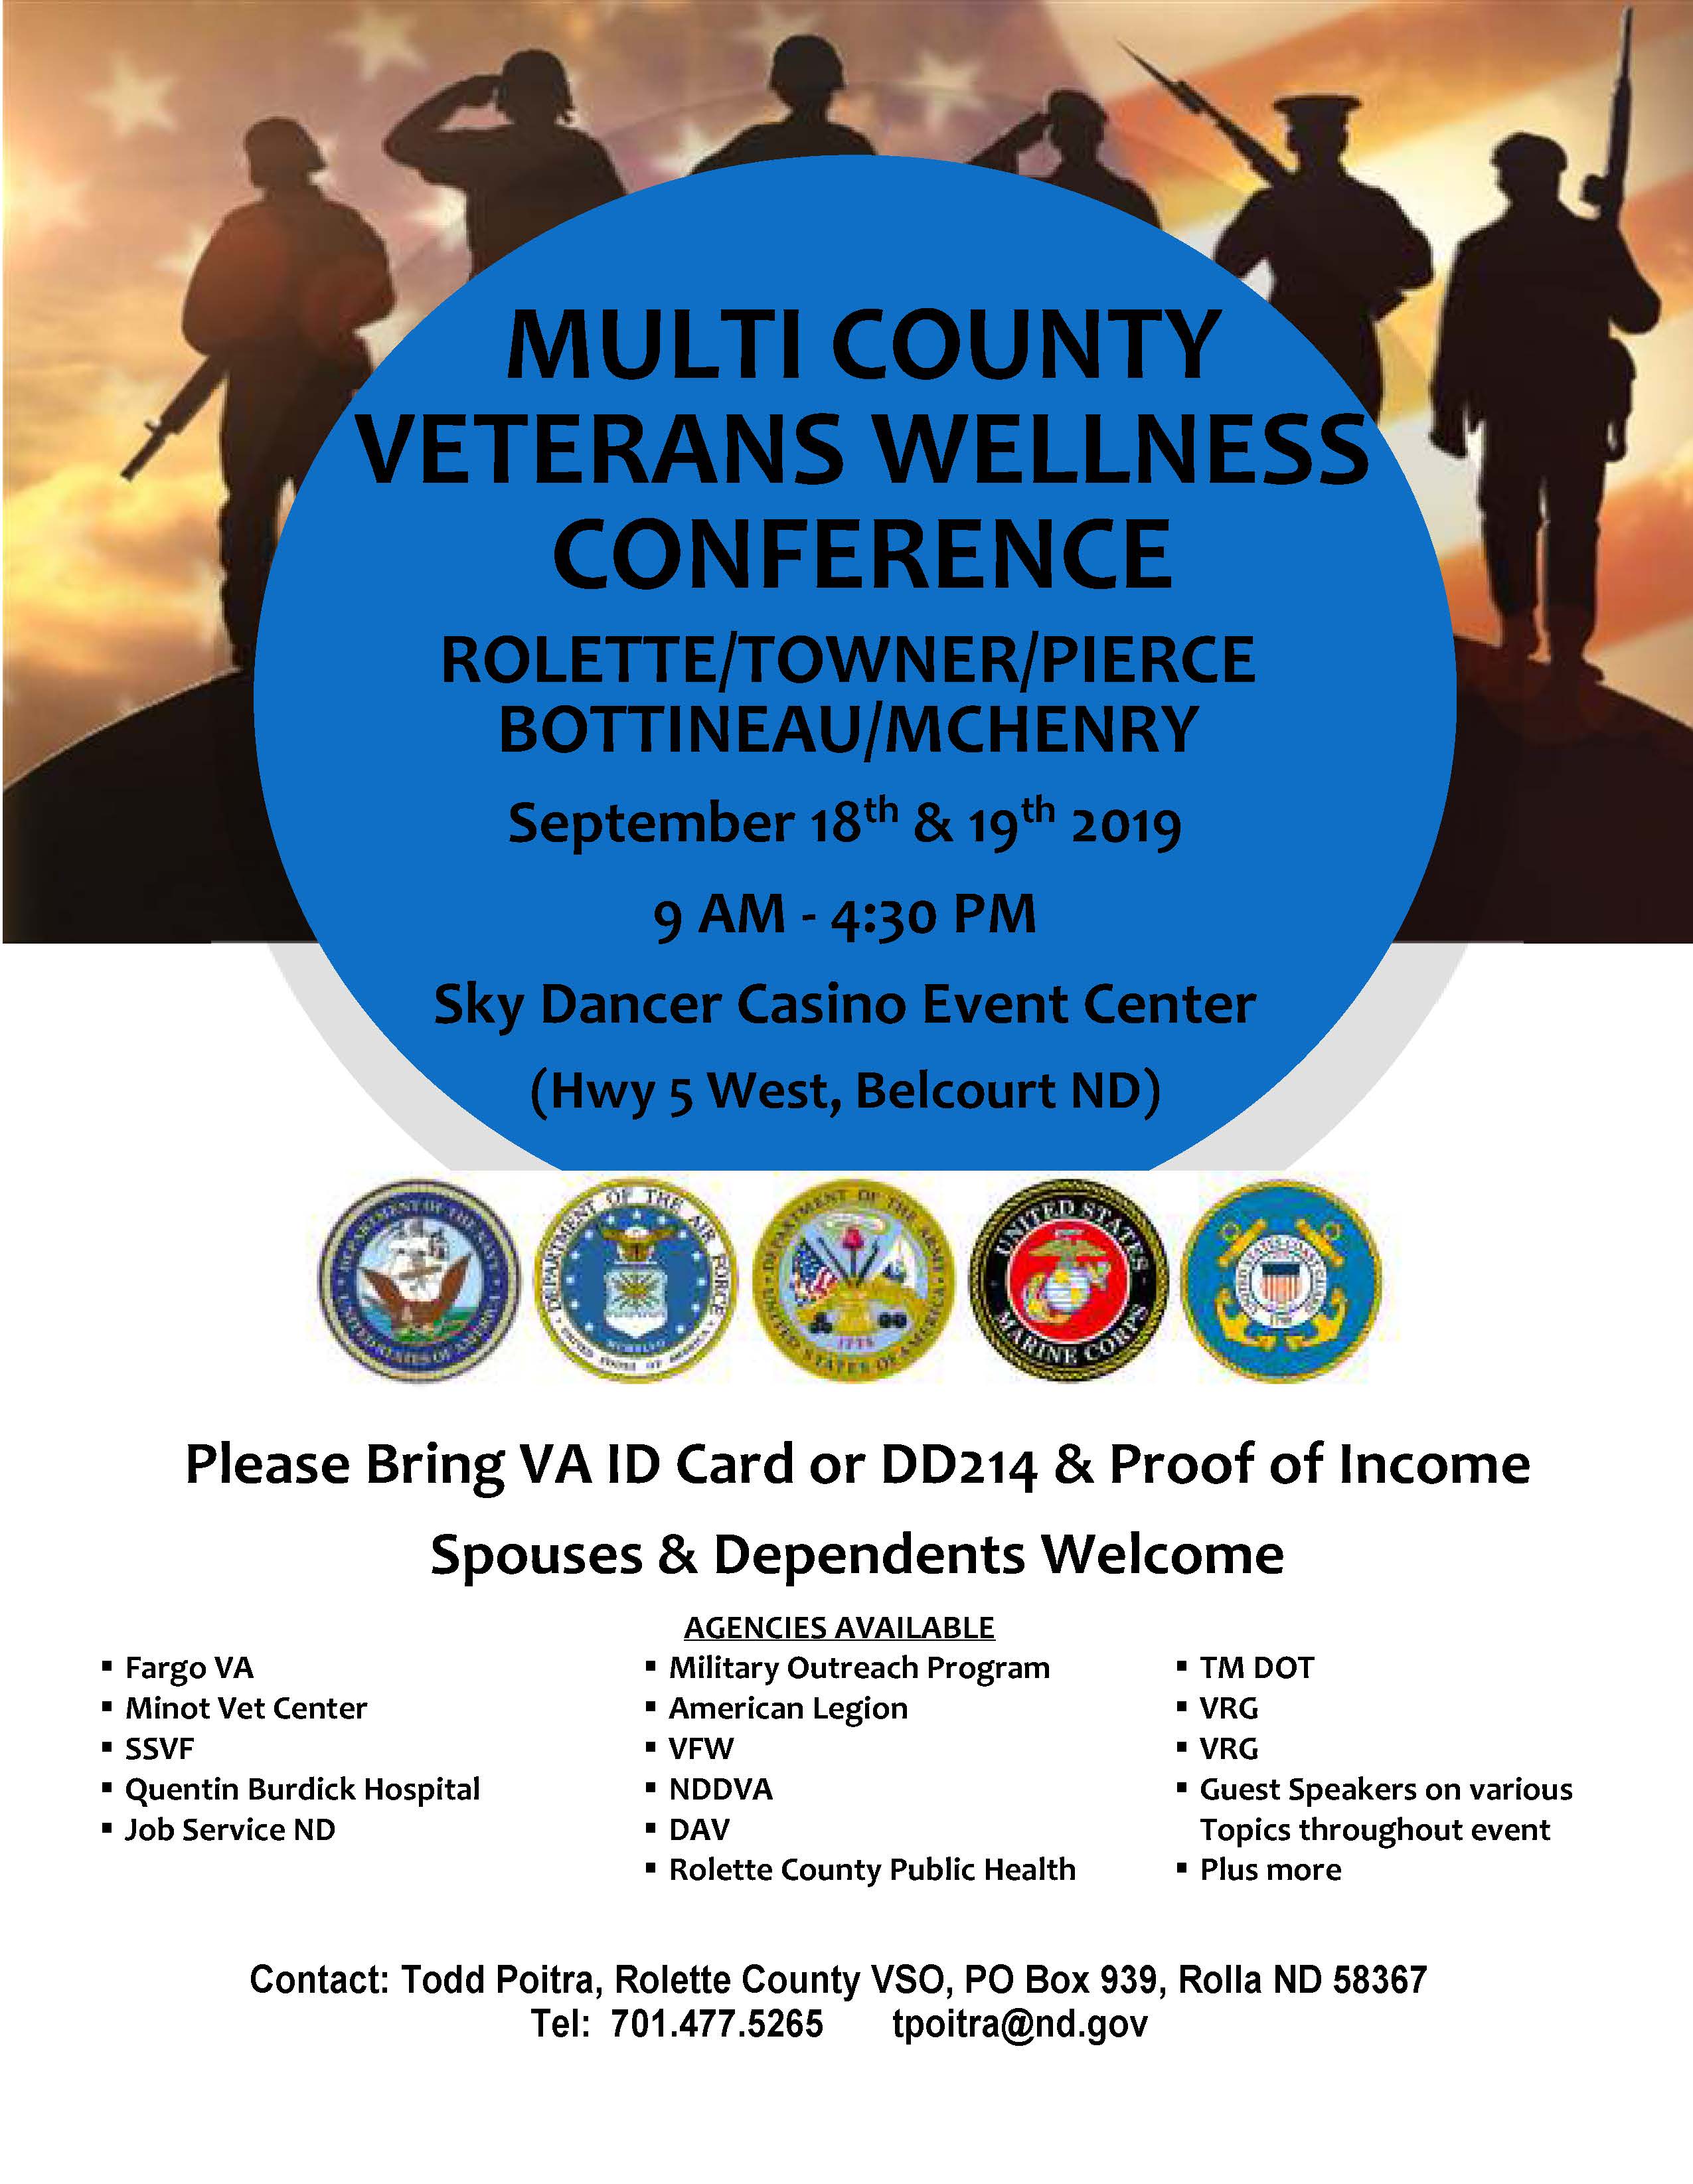 Multi County Veterans Wellness Conference